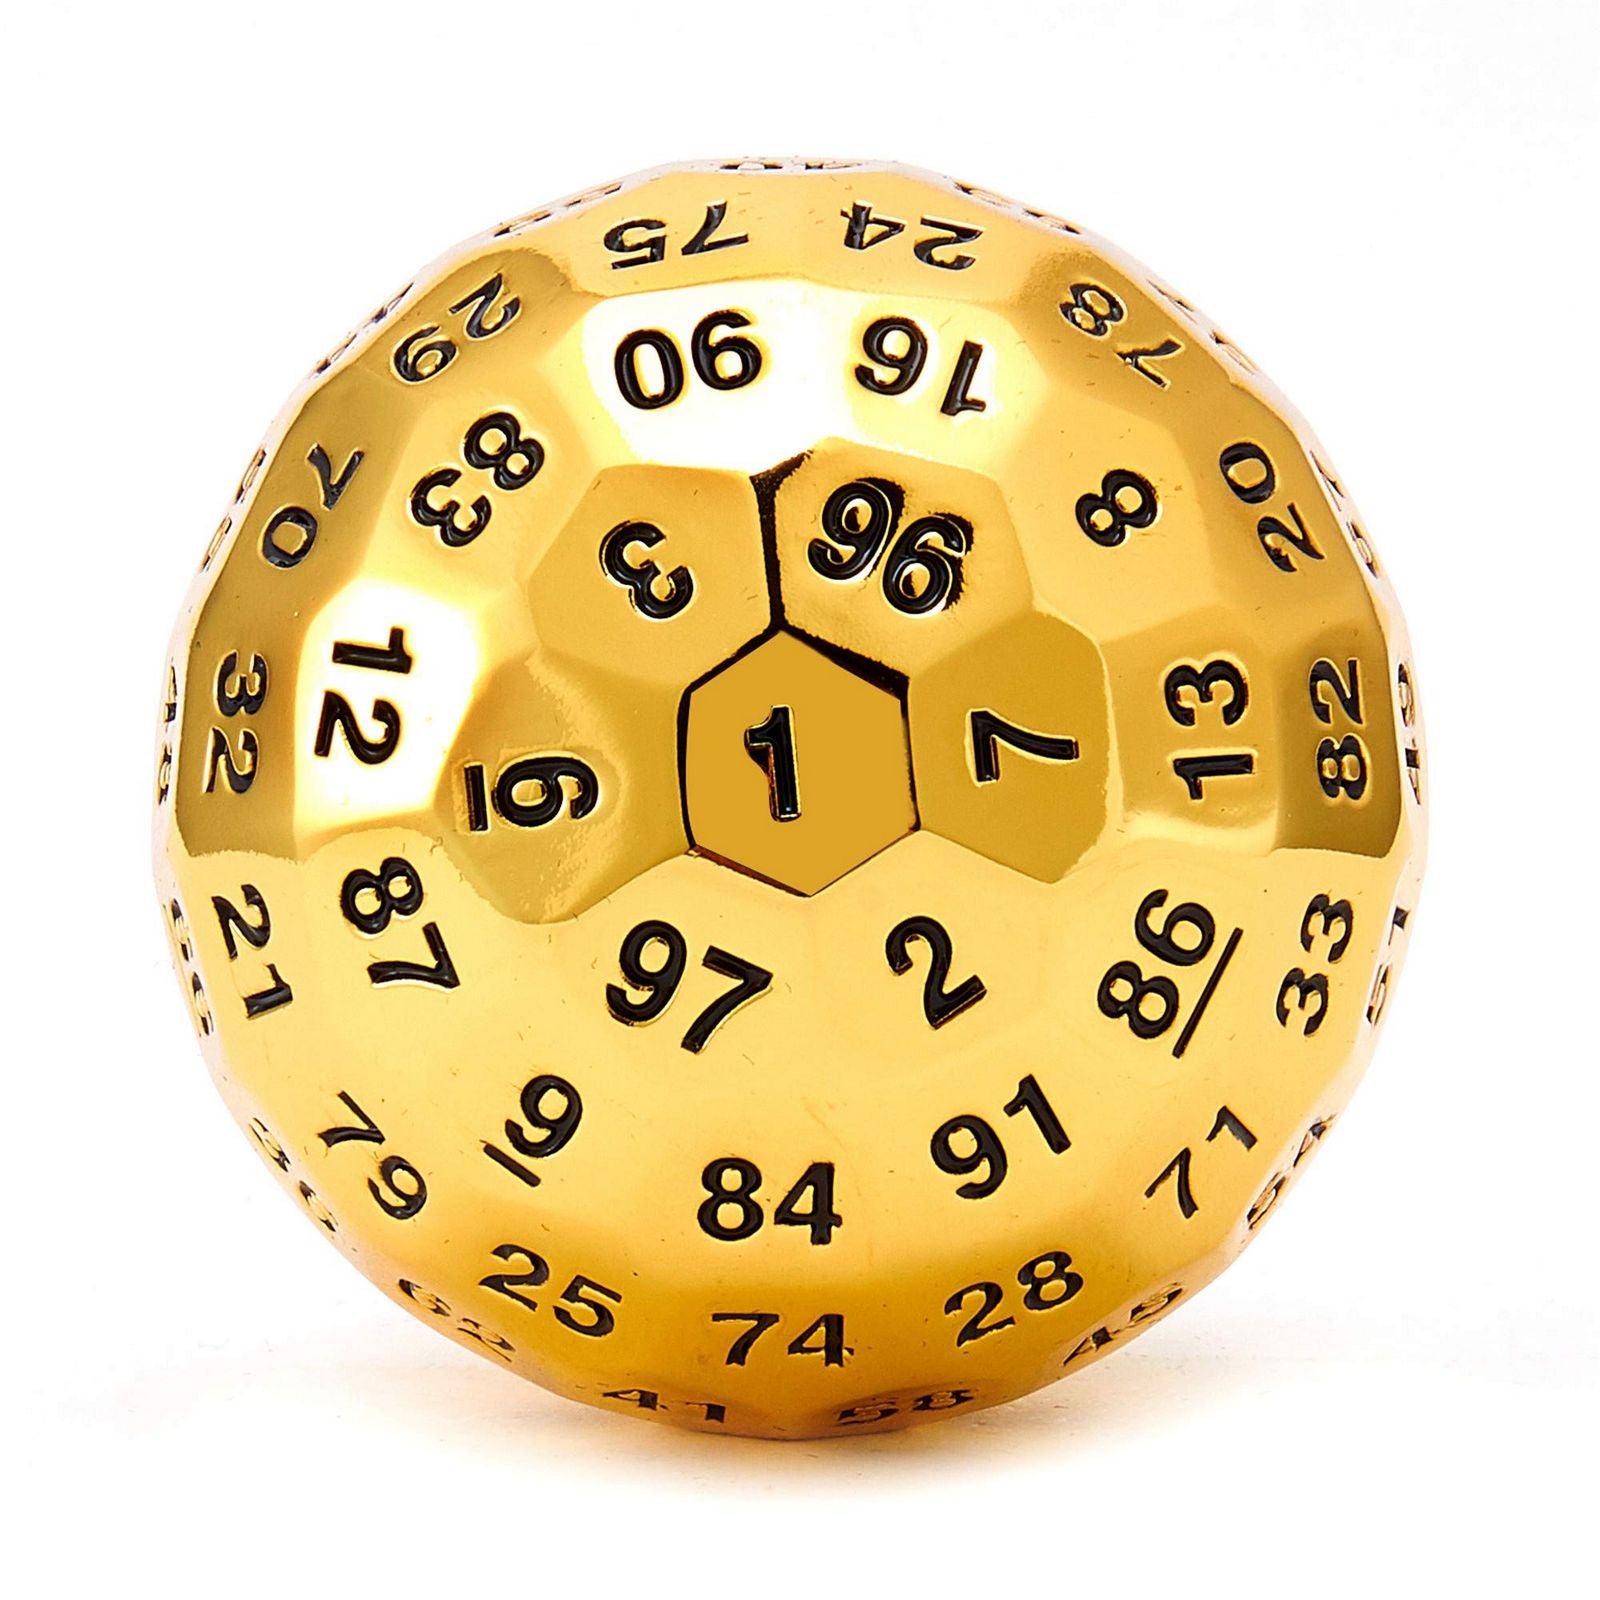 HYMGHO Titans Fist metal Polyhedral Dice 100 Sided D100 die Gold Color - HYMGHO Dice 